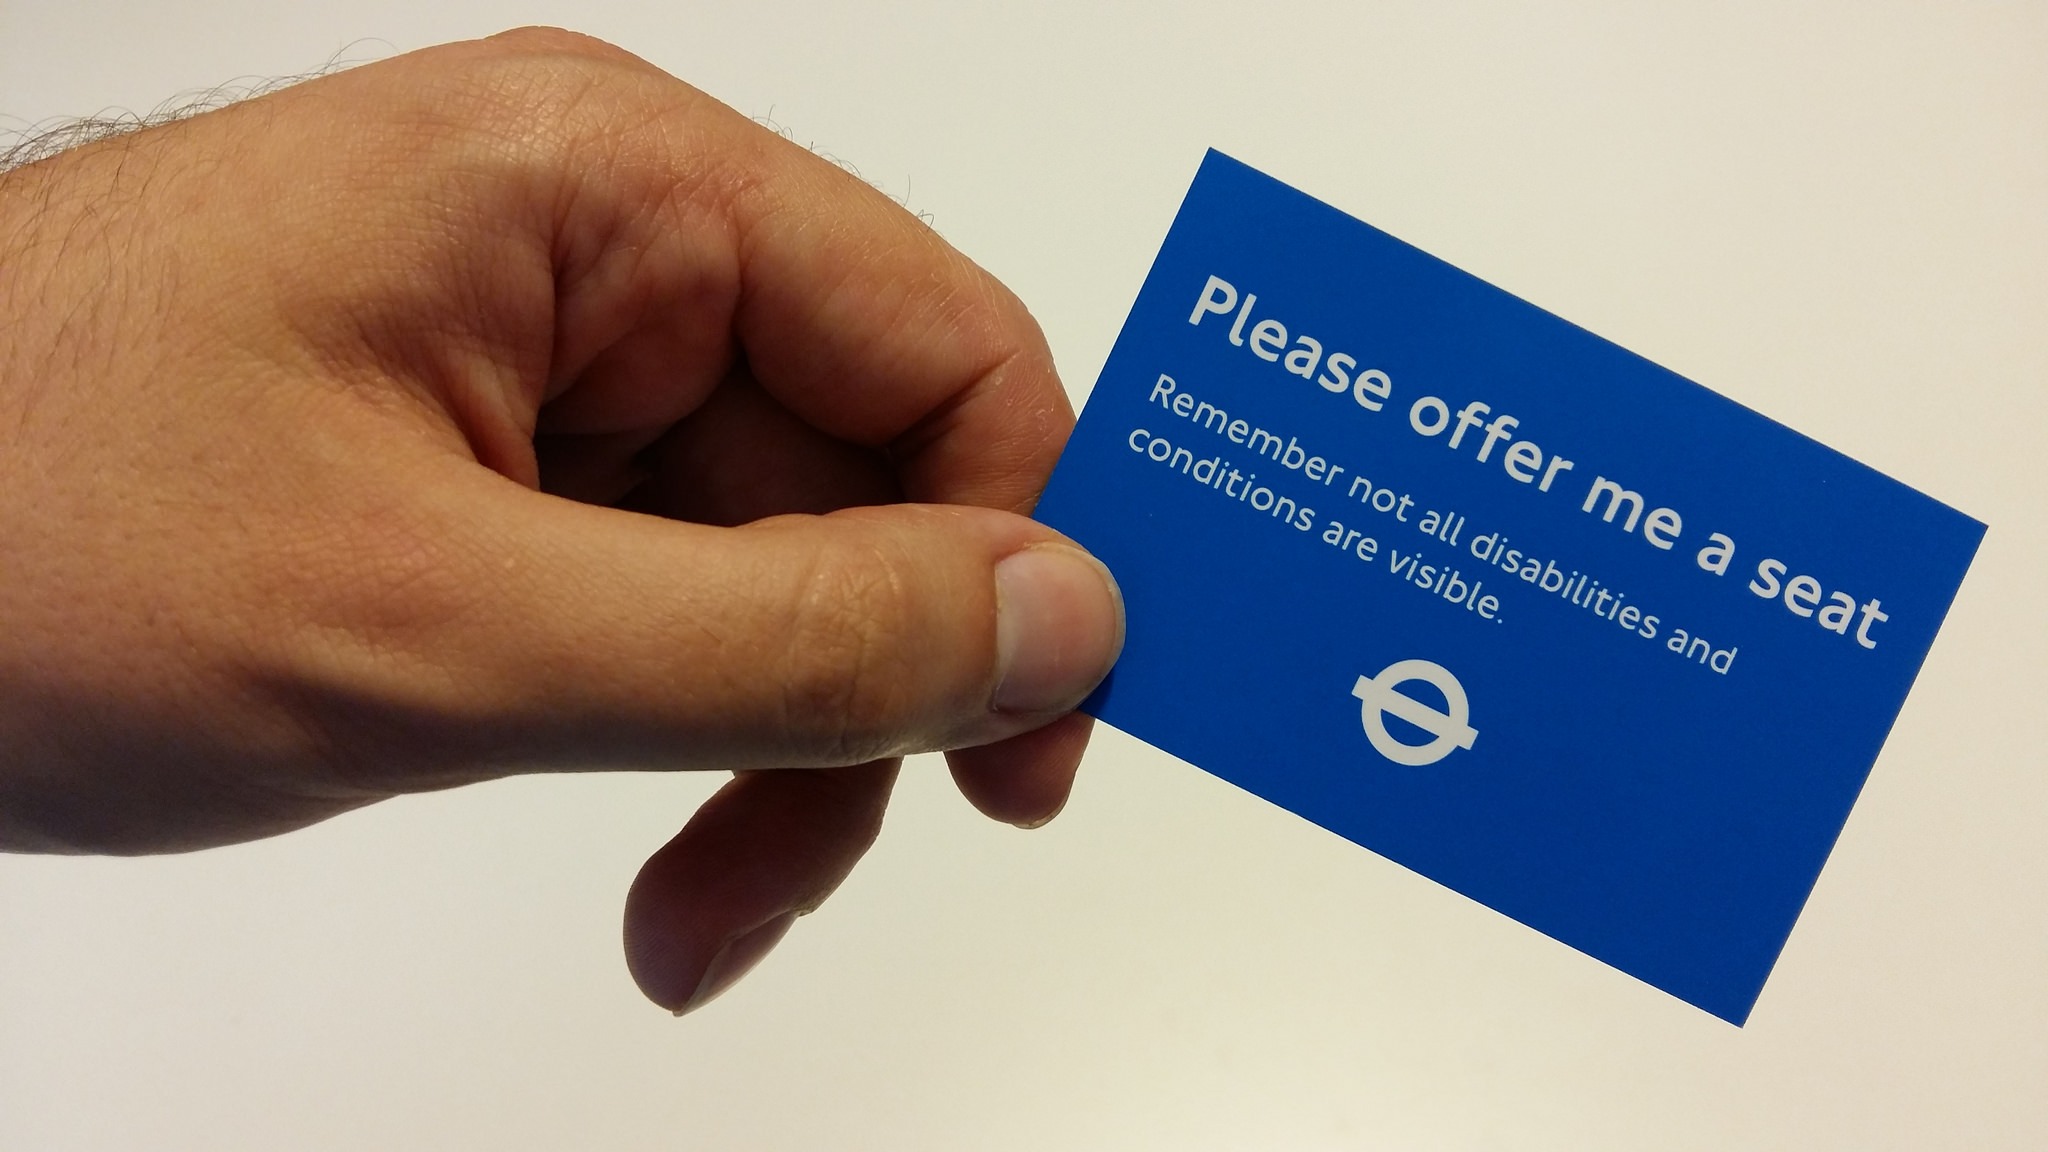 Disabled Kingston commuters to benefit from new TfL ‘please offer me a seat’ badges